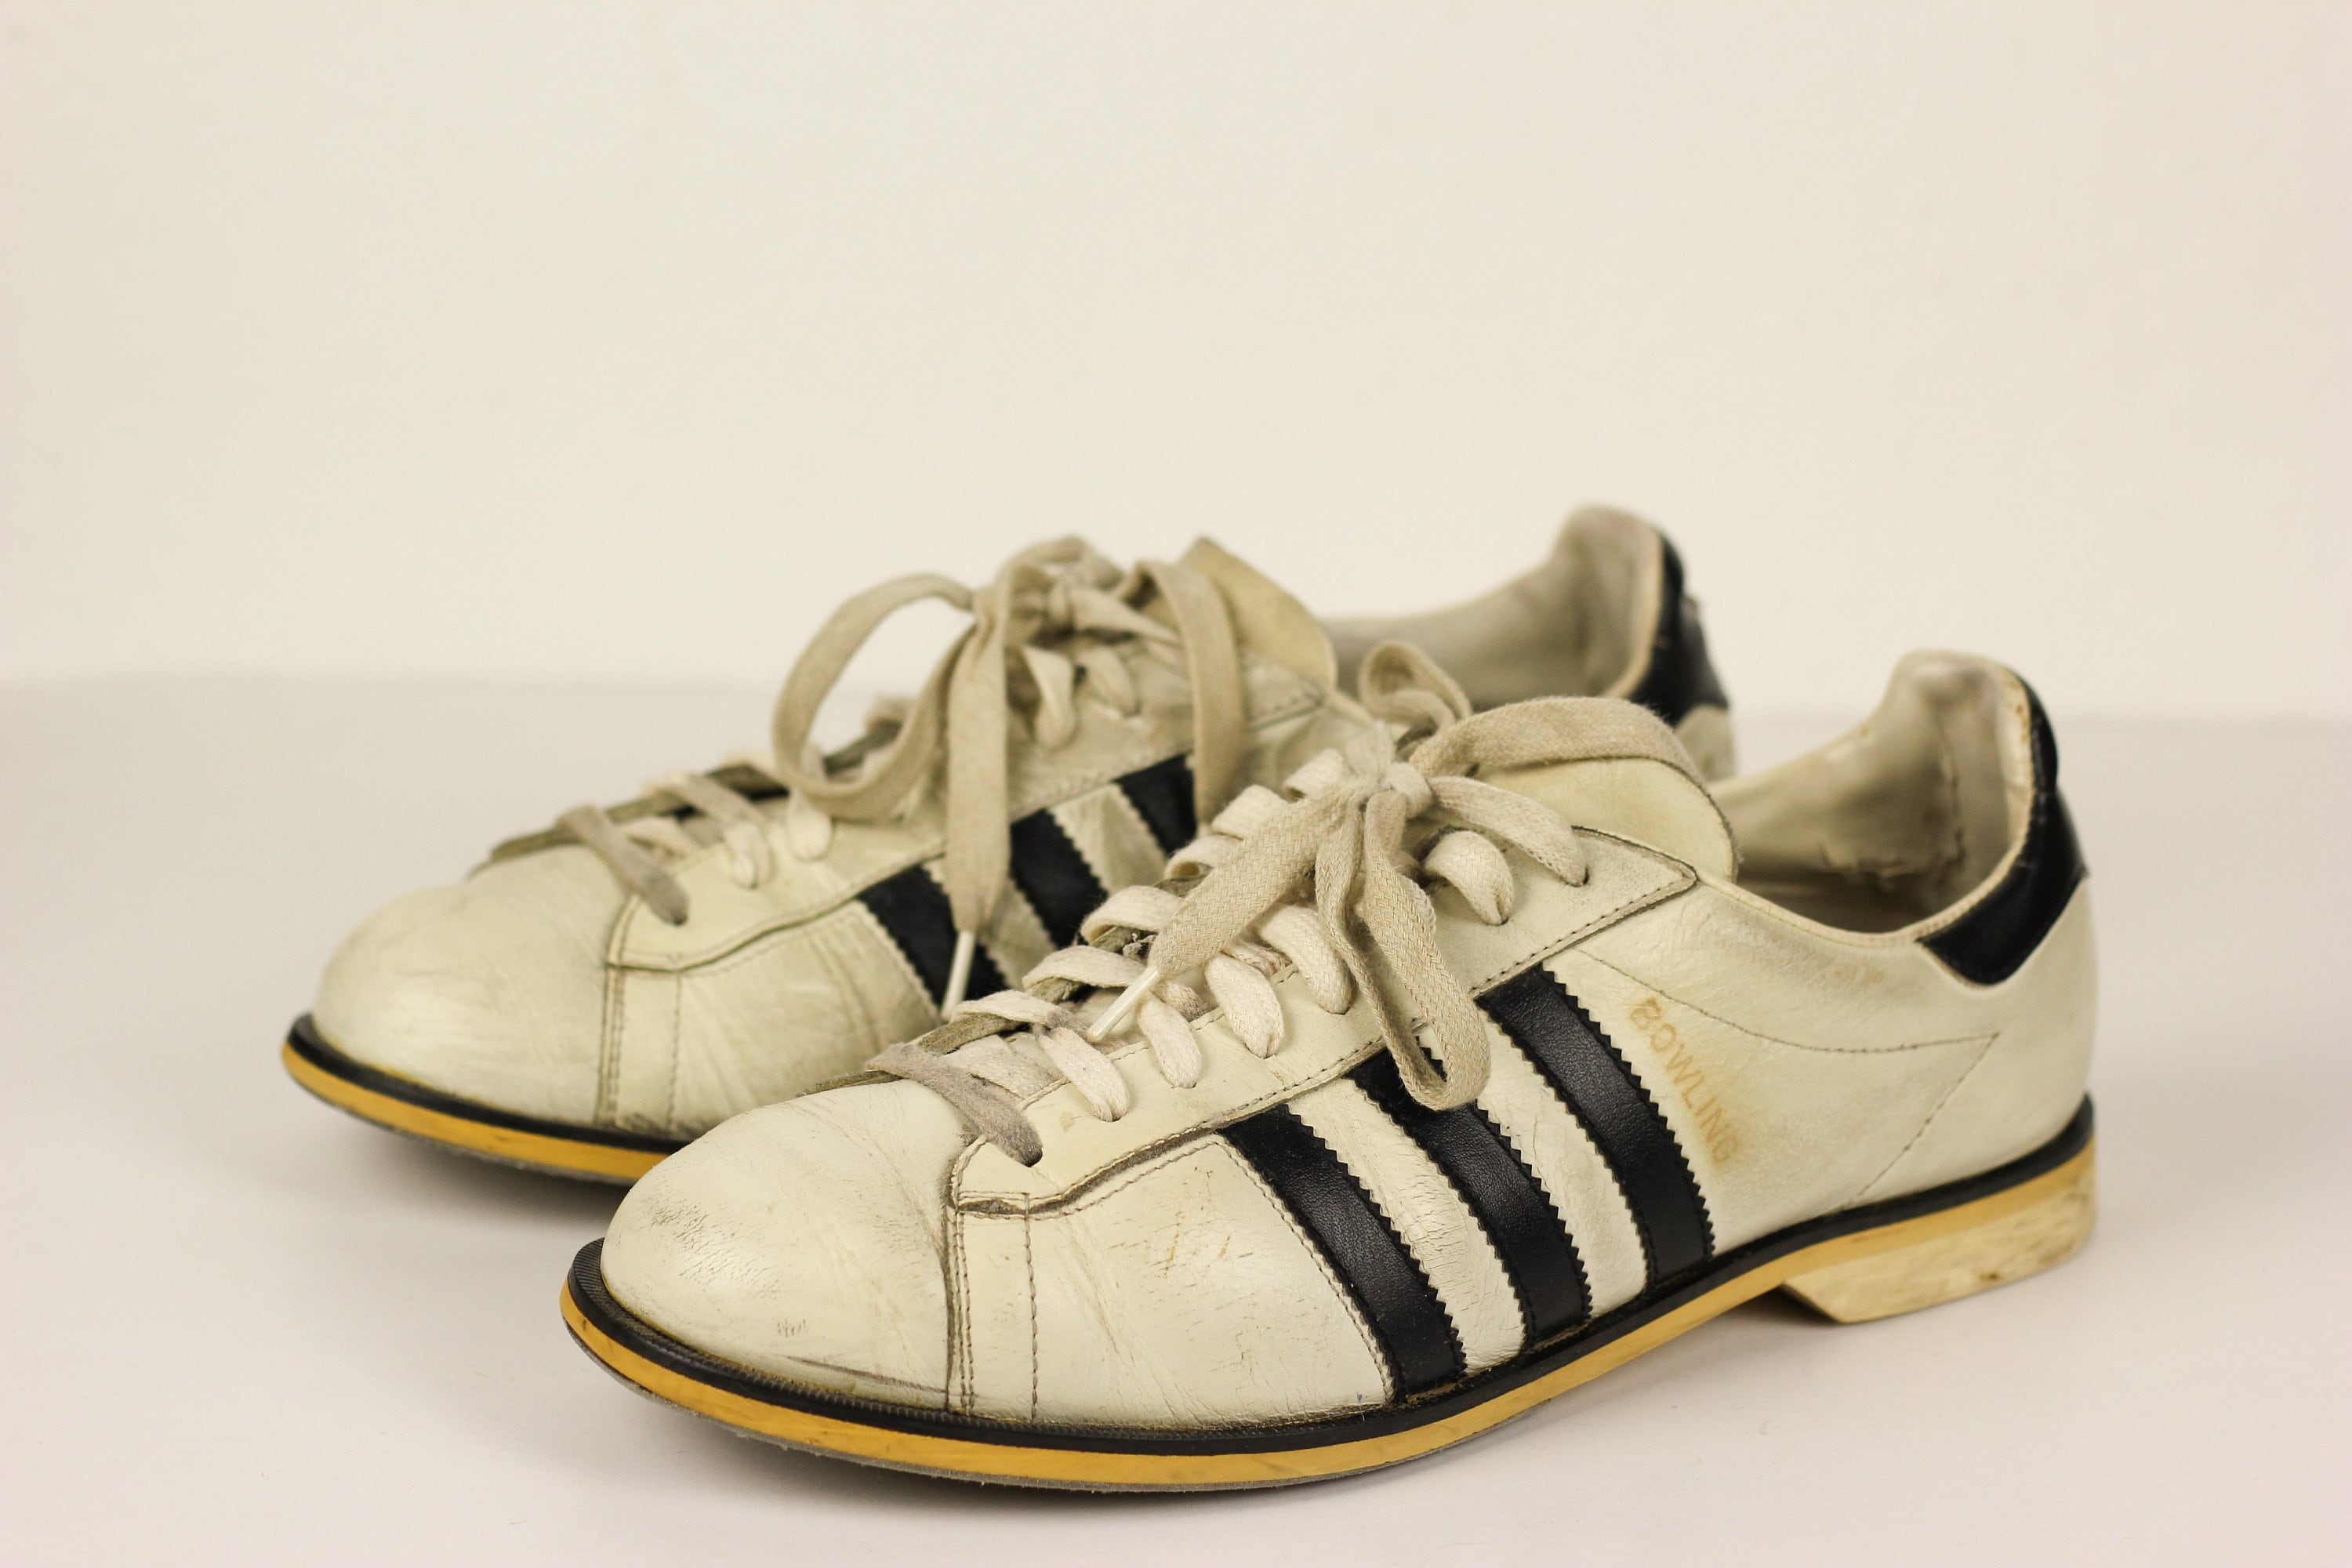 True Adidas Bowling Shoes Sneaker Trainers Gr 8 / 42 - Etsy